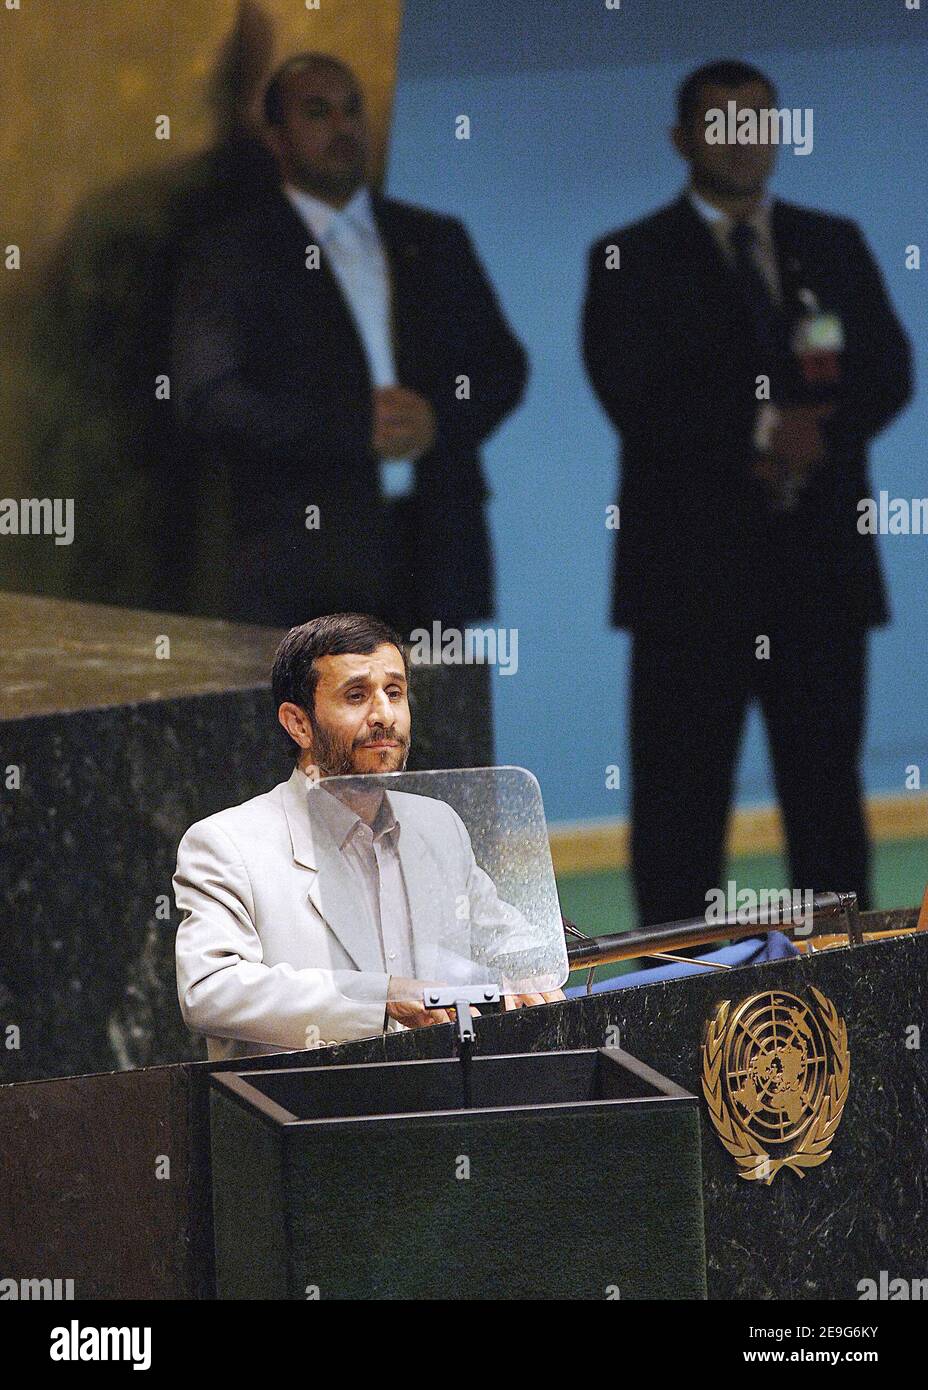 Iranian President Mahmoud Ahmadinejad addresses the 61st United Nations General Assembly session at the UN headquarters in New York City, NY, USA, on September 19, 2006. Ahmadinejad launched a scathing attack on the United States and Britain, accusing them of using the United Nations to dominate international affairs and prevent his country from having nuclear power. Photo by Olivier Douliery/ABACAPRESS.COM Stock Photo